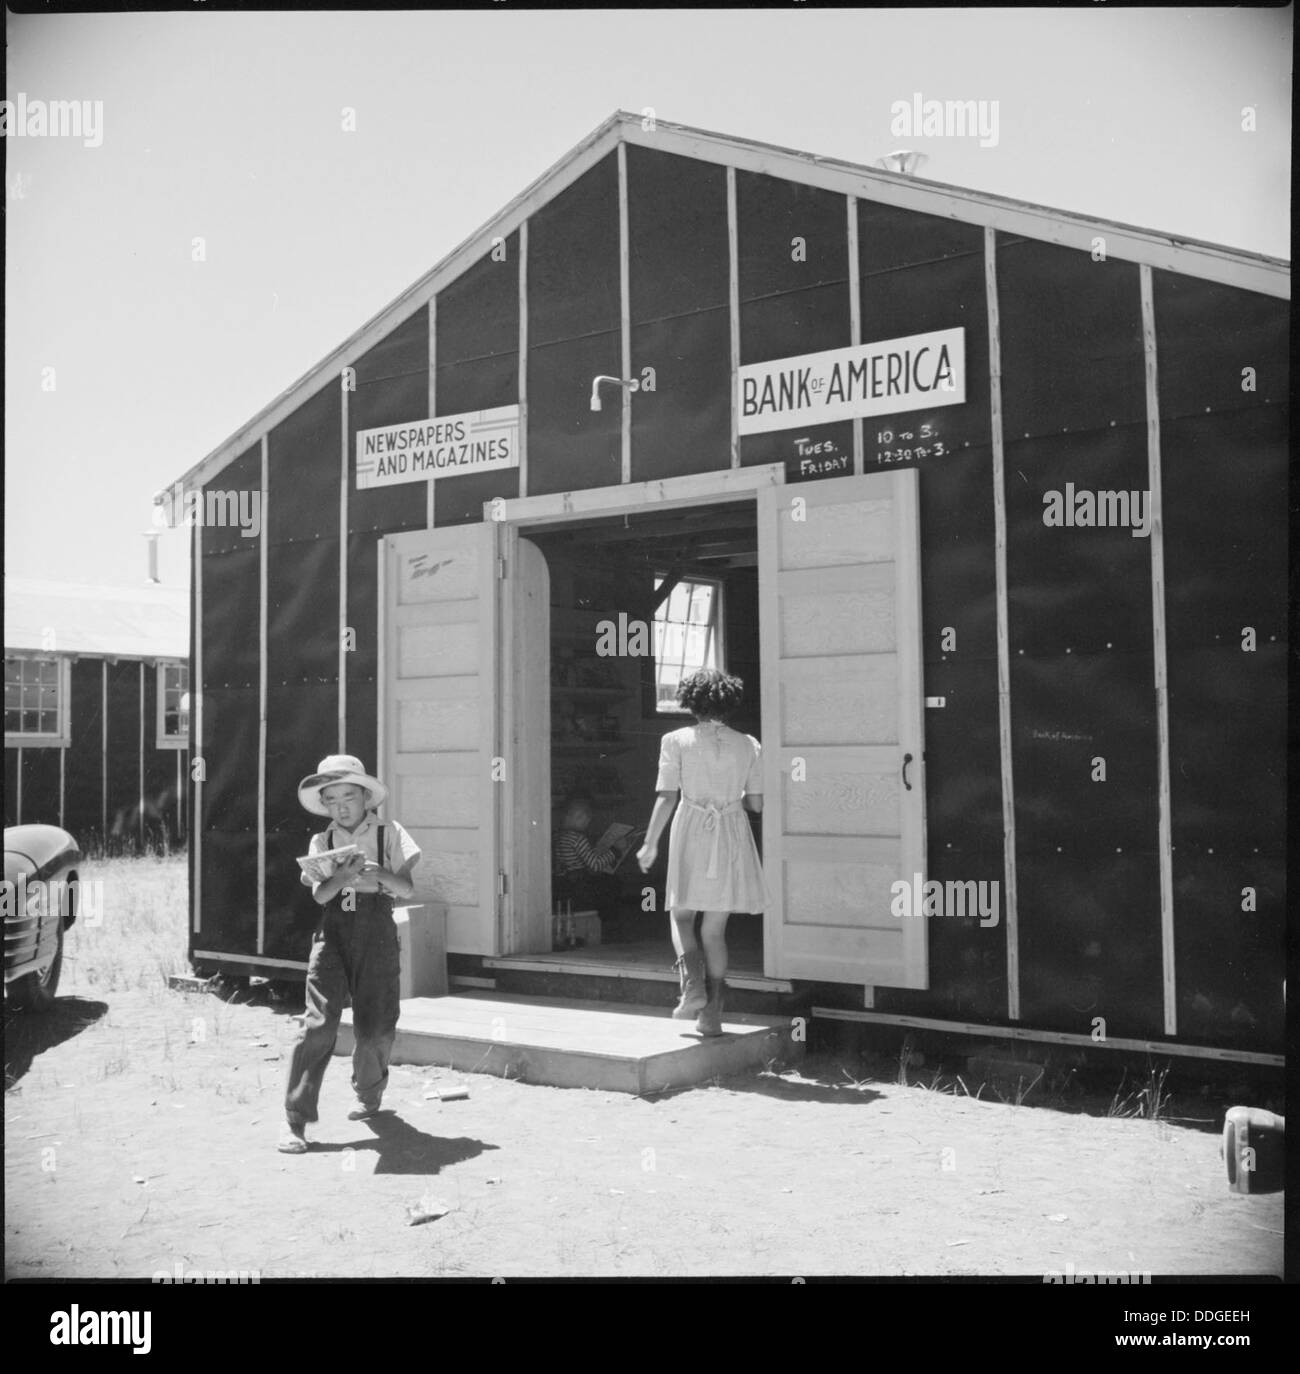 Tule Lake Relocation Center, Newell, California. A view of the bank and newsstand at this War Reloc . . . 538244 Stock Photo